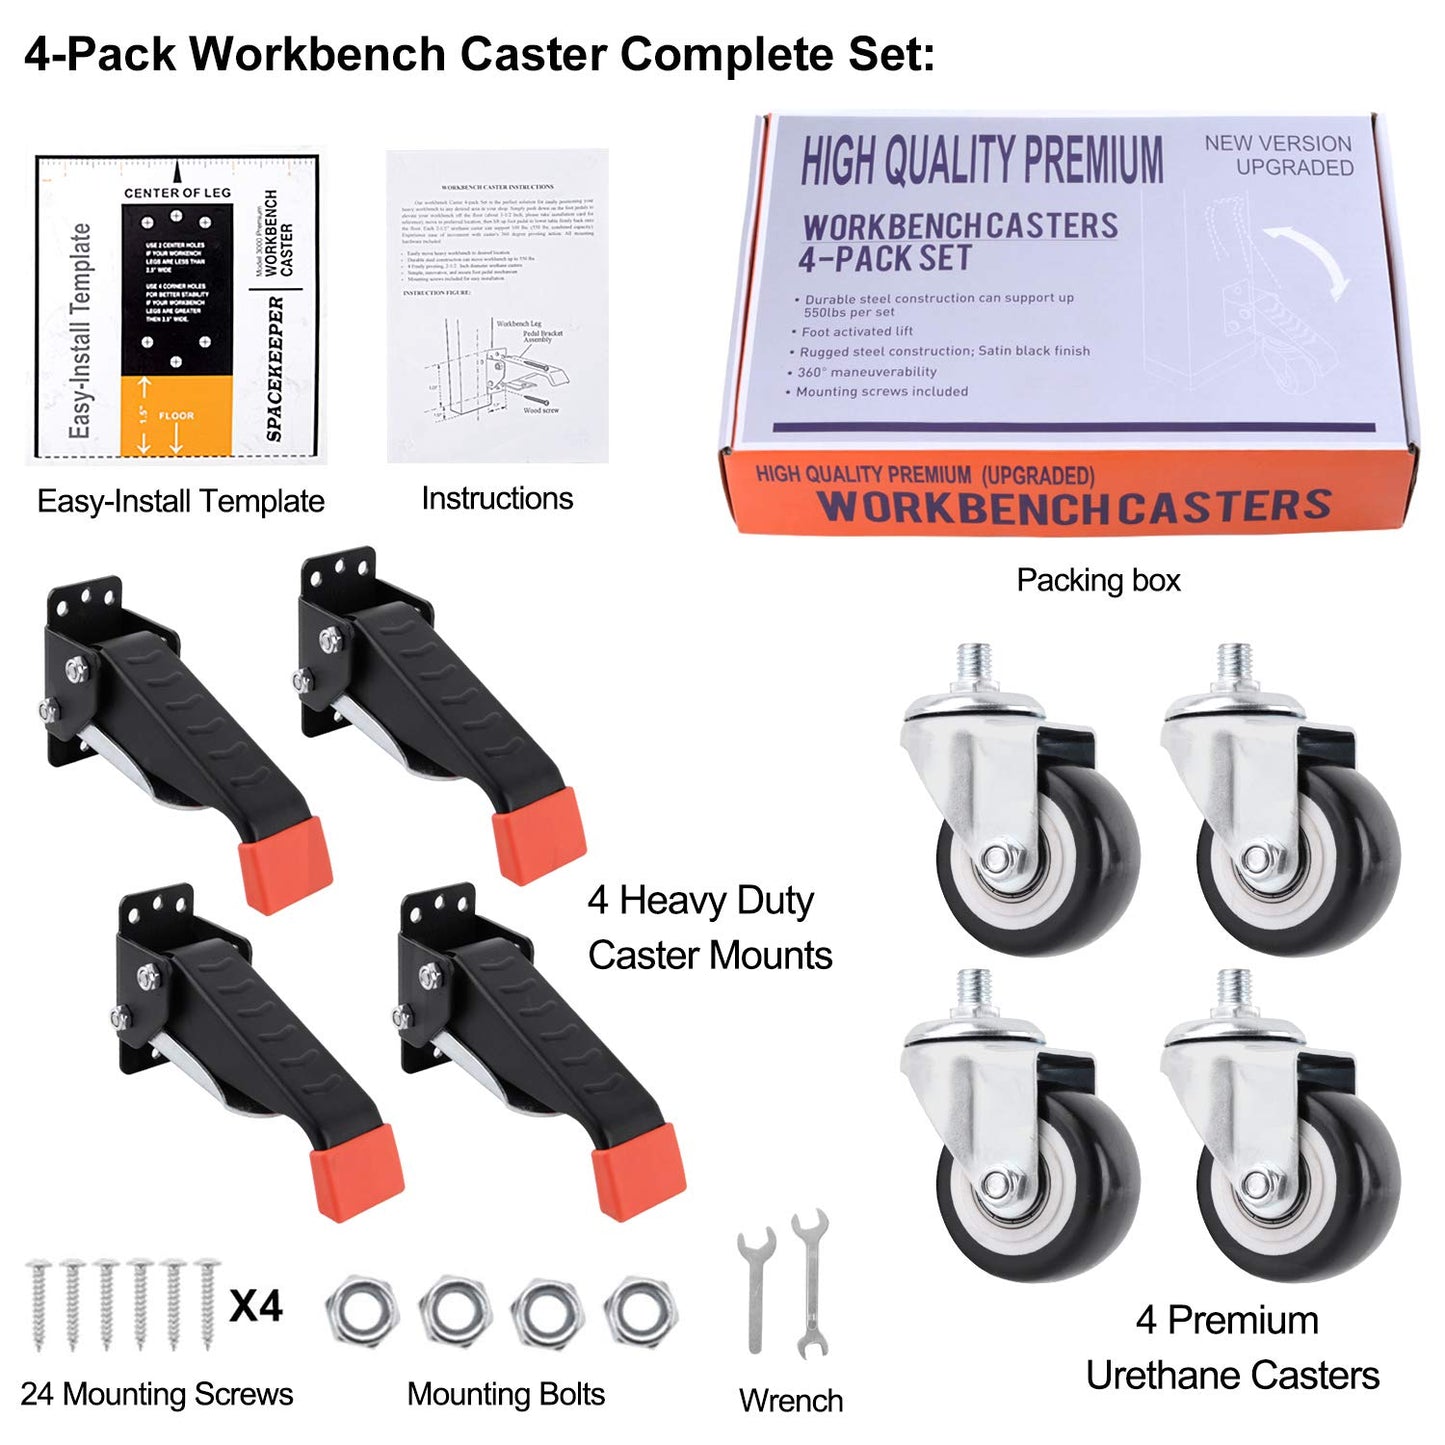 SPACEKEEPER Retractable Workbench Casters kit 660 Lbs - 4 Heavy Duty Retractable Casters Designed for Workbenches Machinery & Tables